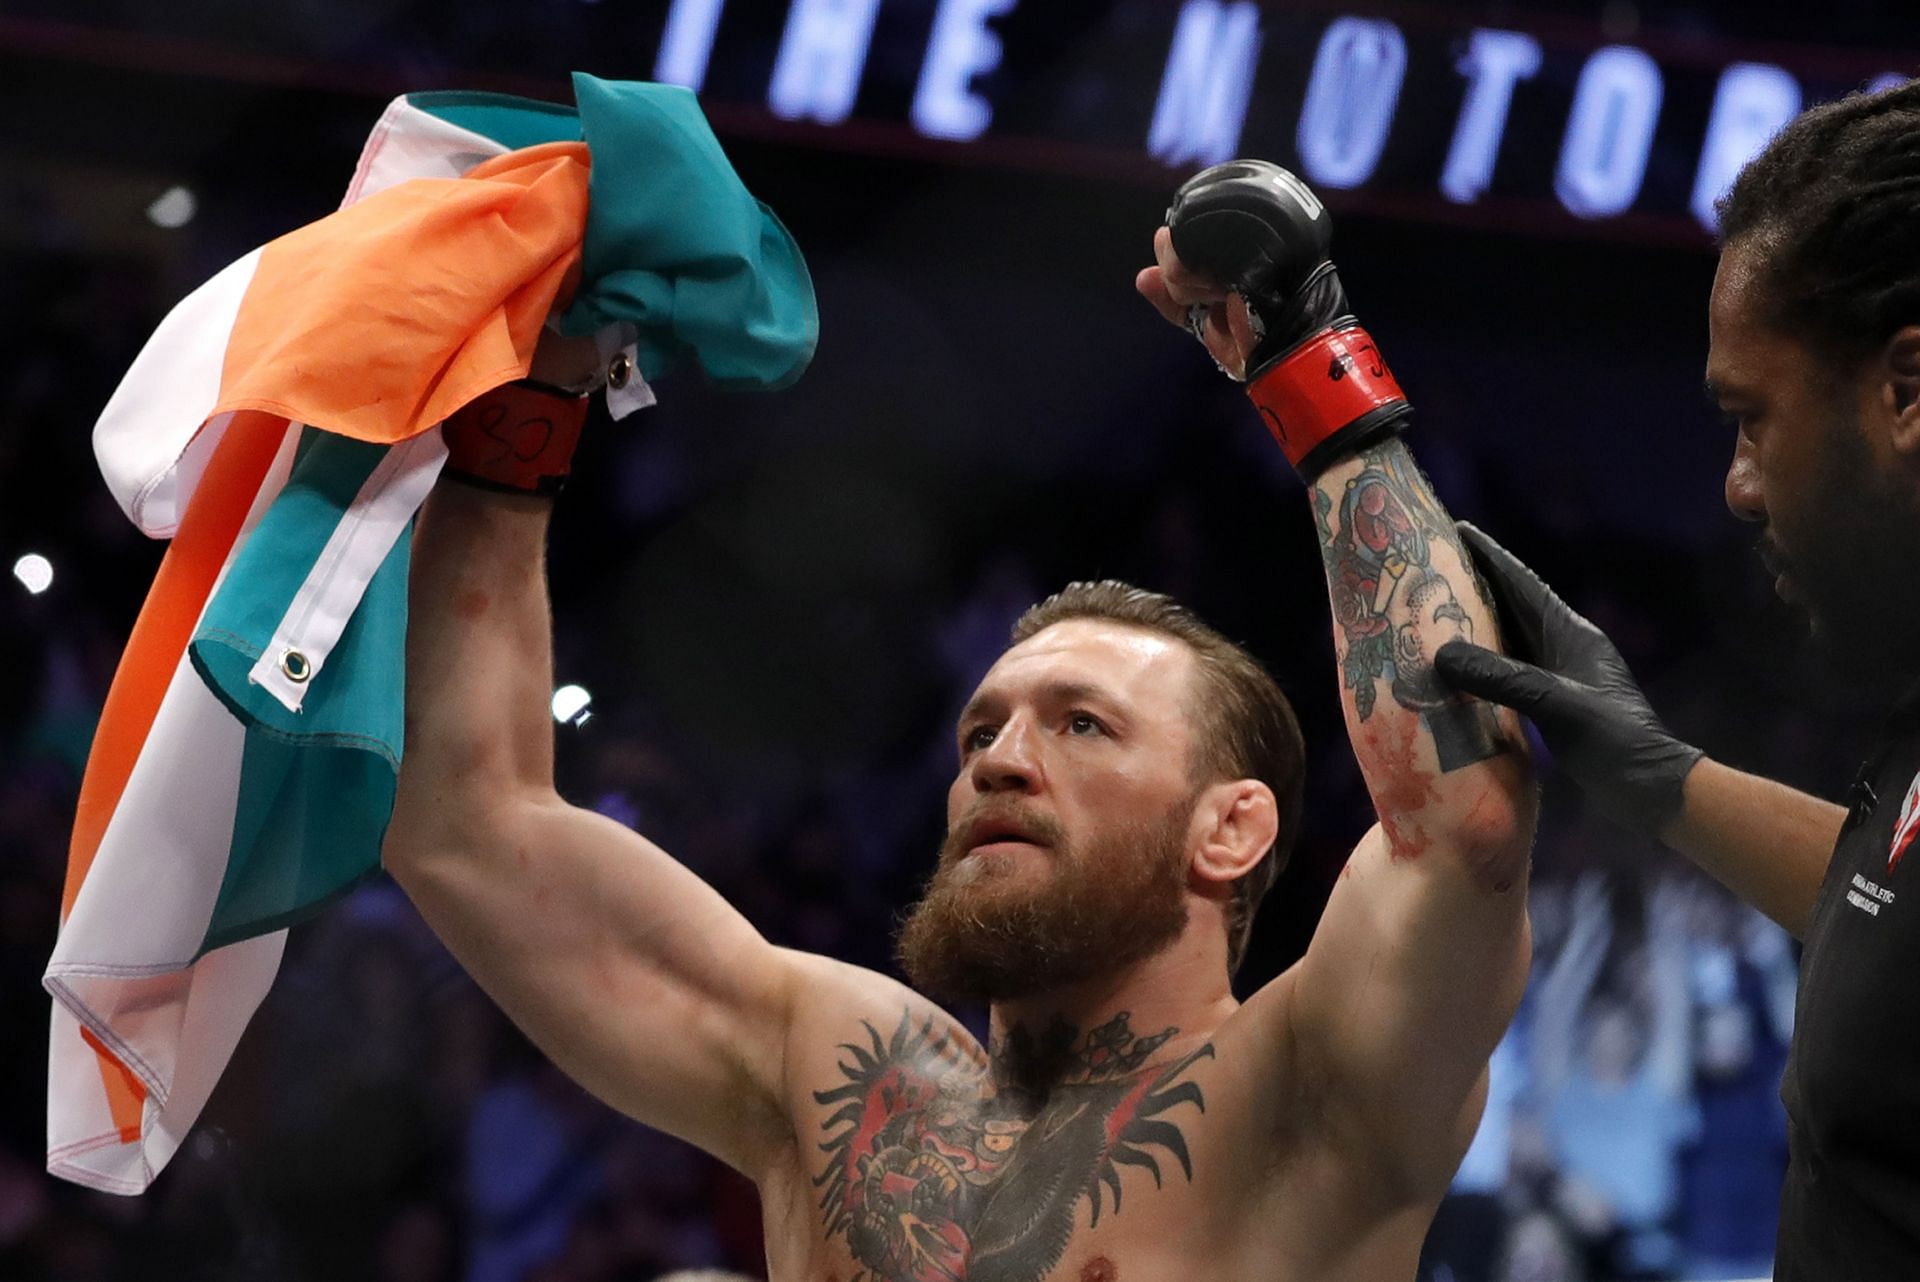 After winning the featherweight title in 2015, could Conor McGregor have faced Frankie Edgar?